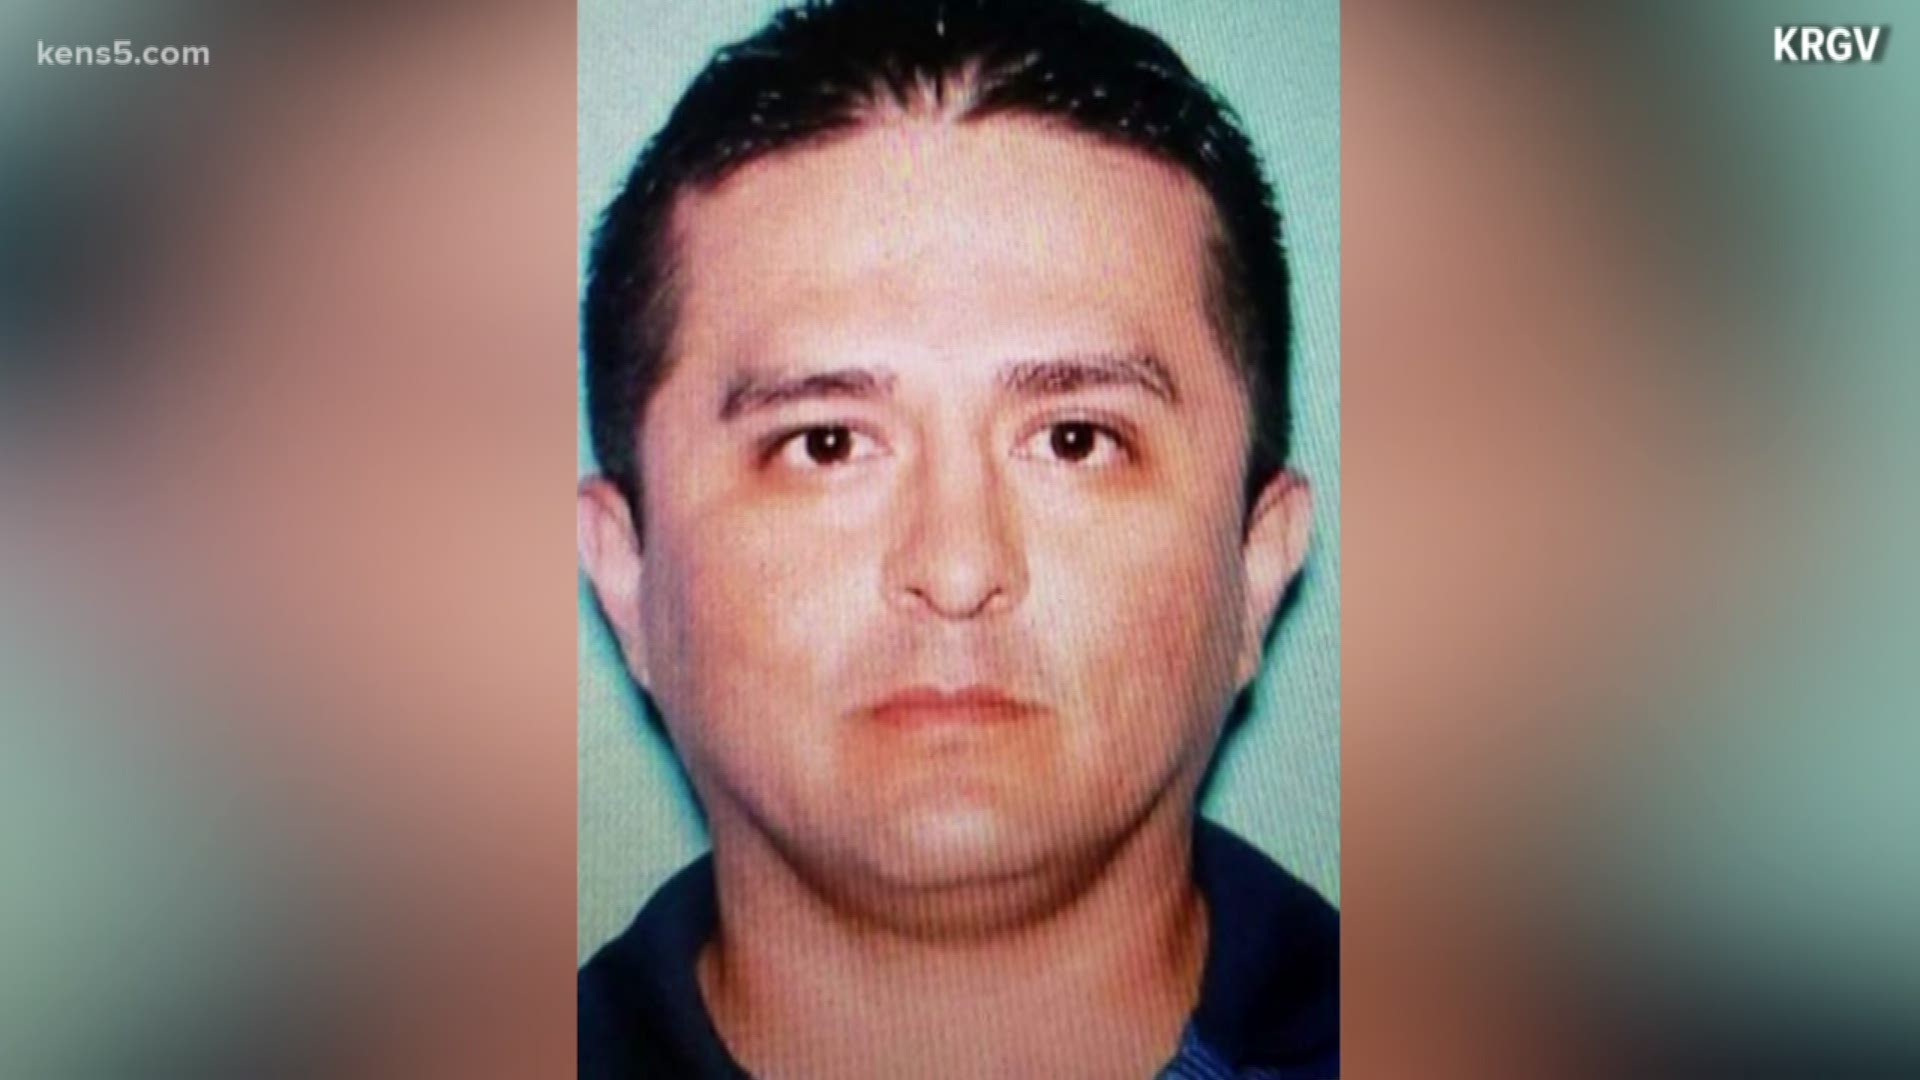 Ortiz was a 10-year veteran of the Border Patrol. He's charged in the deaths of four women.